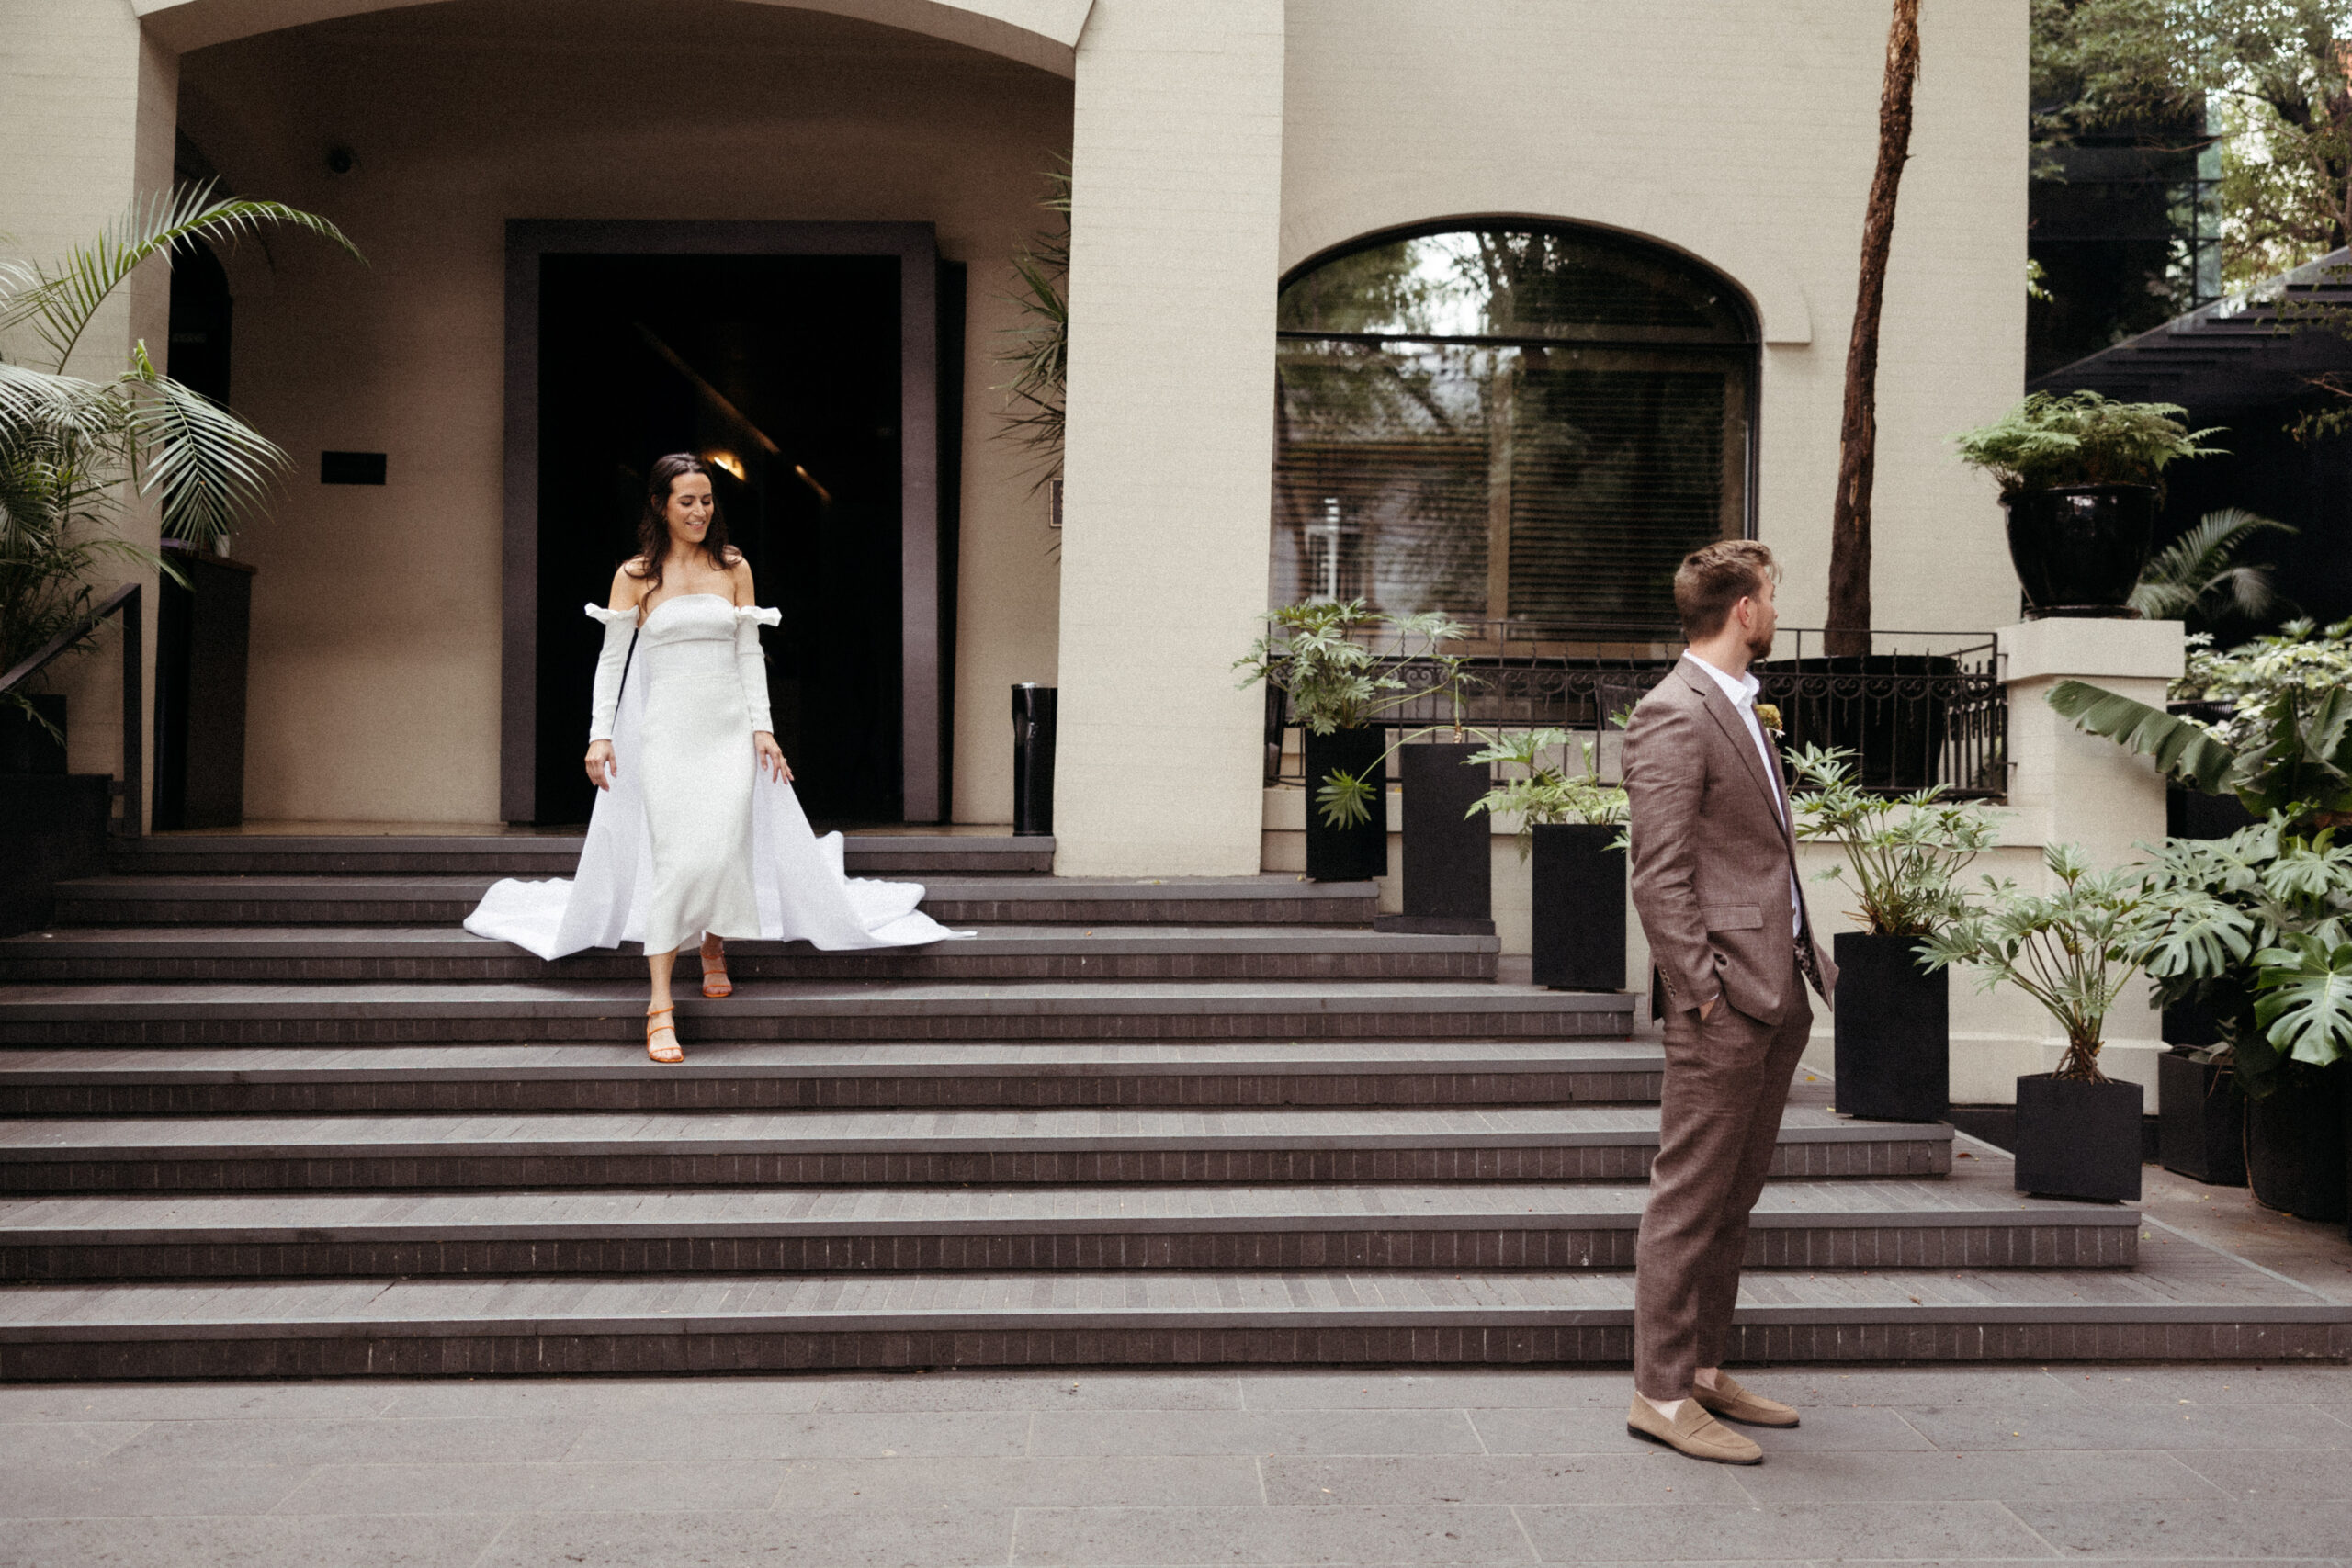 Stunning bride and groom prepare for their first look photos!